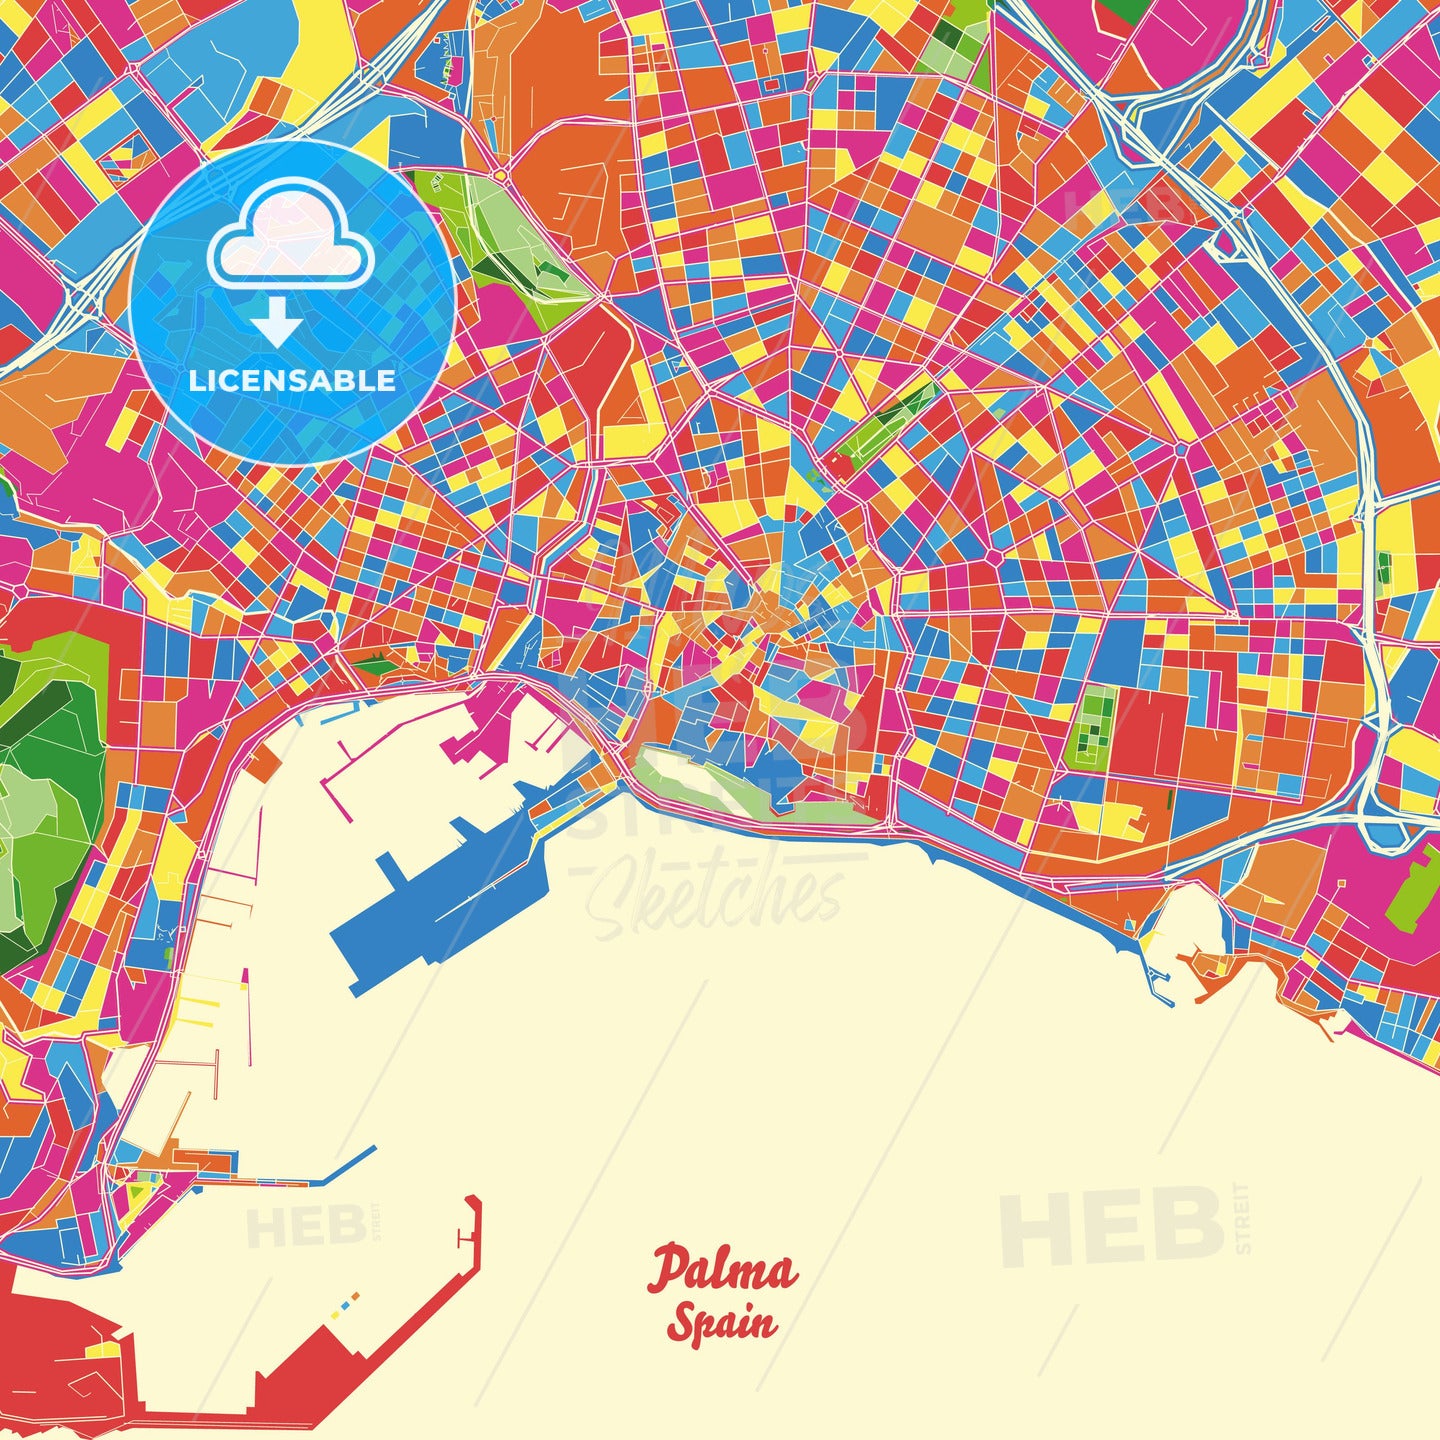 Palma, Spain Crazy Colorful Street Map Poster Template - HEBSTREITS Sketches